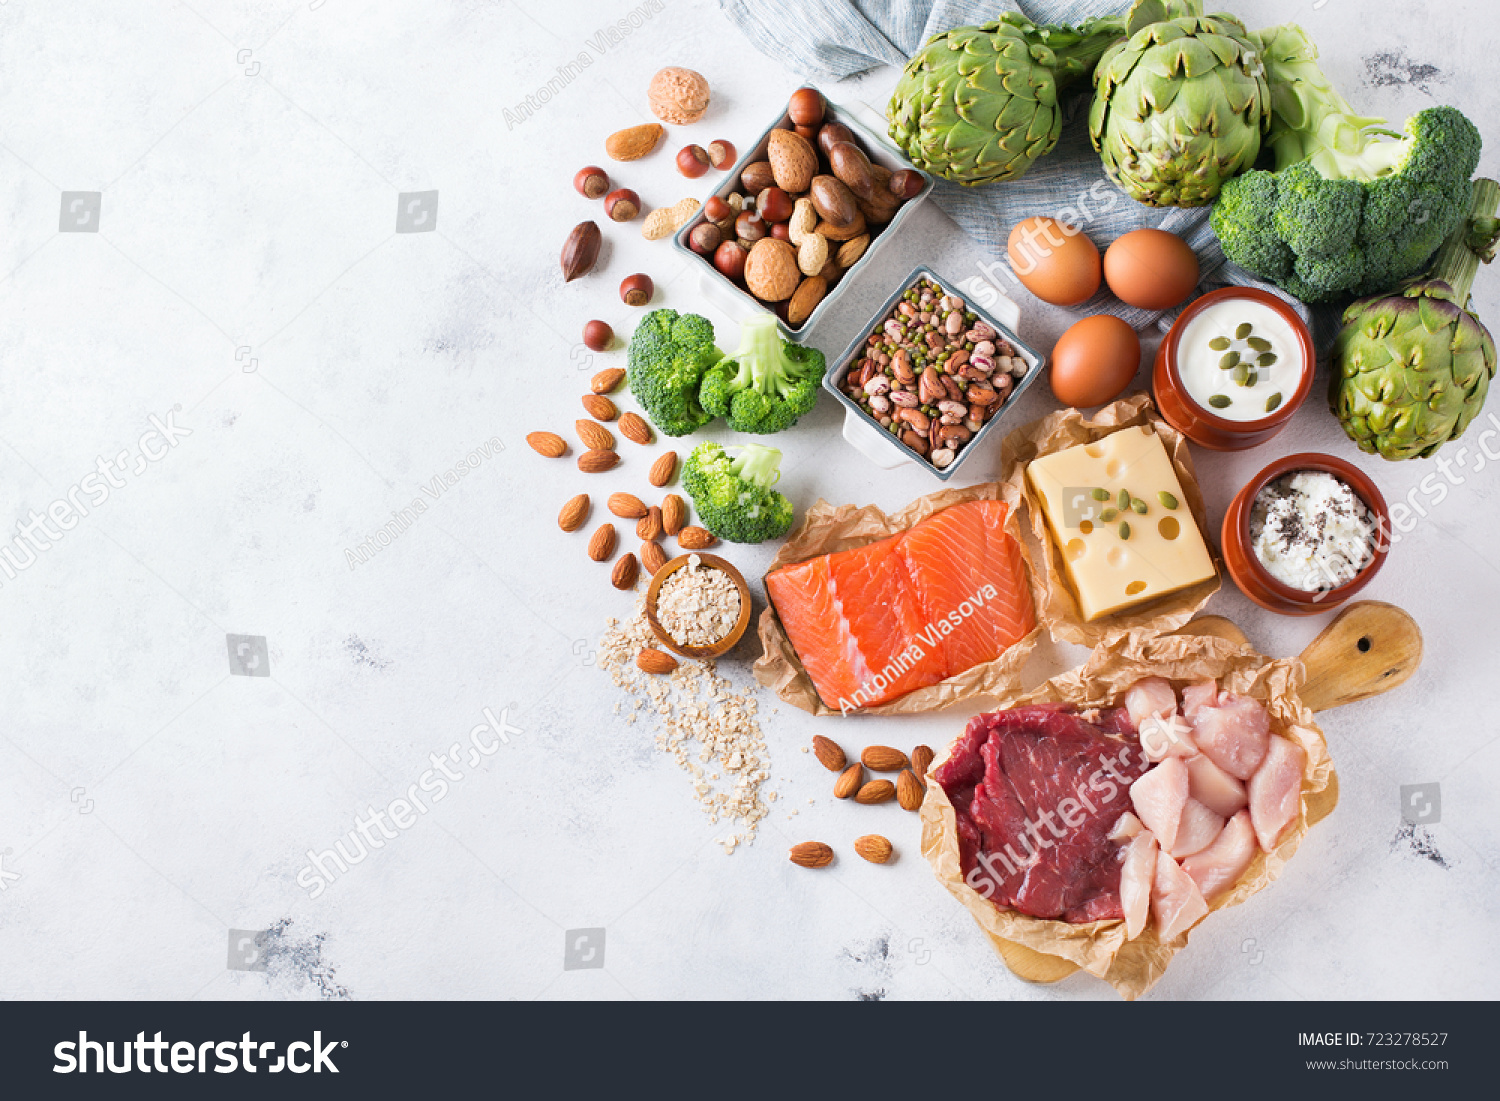 Assortment of healthy protein source and body building food. Meat beef salmon chicken breast eggs dairy products cheese yogurt beans artichokes broccoli nuts oat meal. Copy space background, top view #723278527